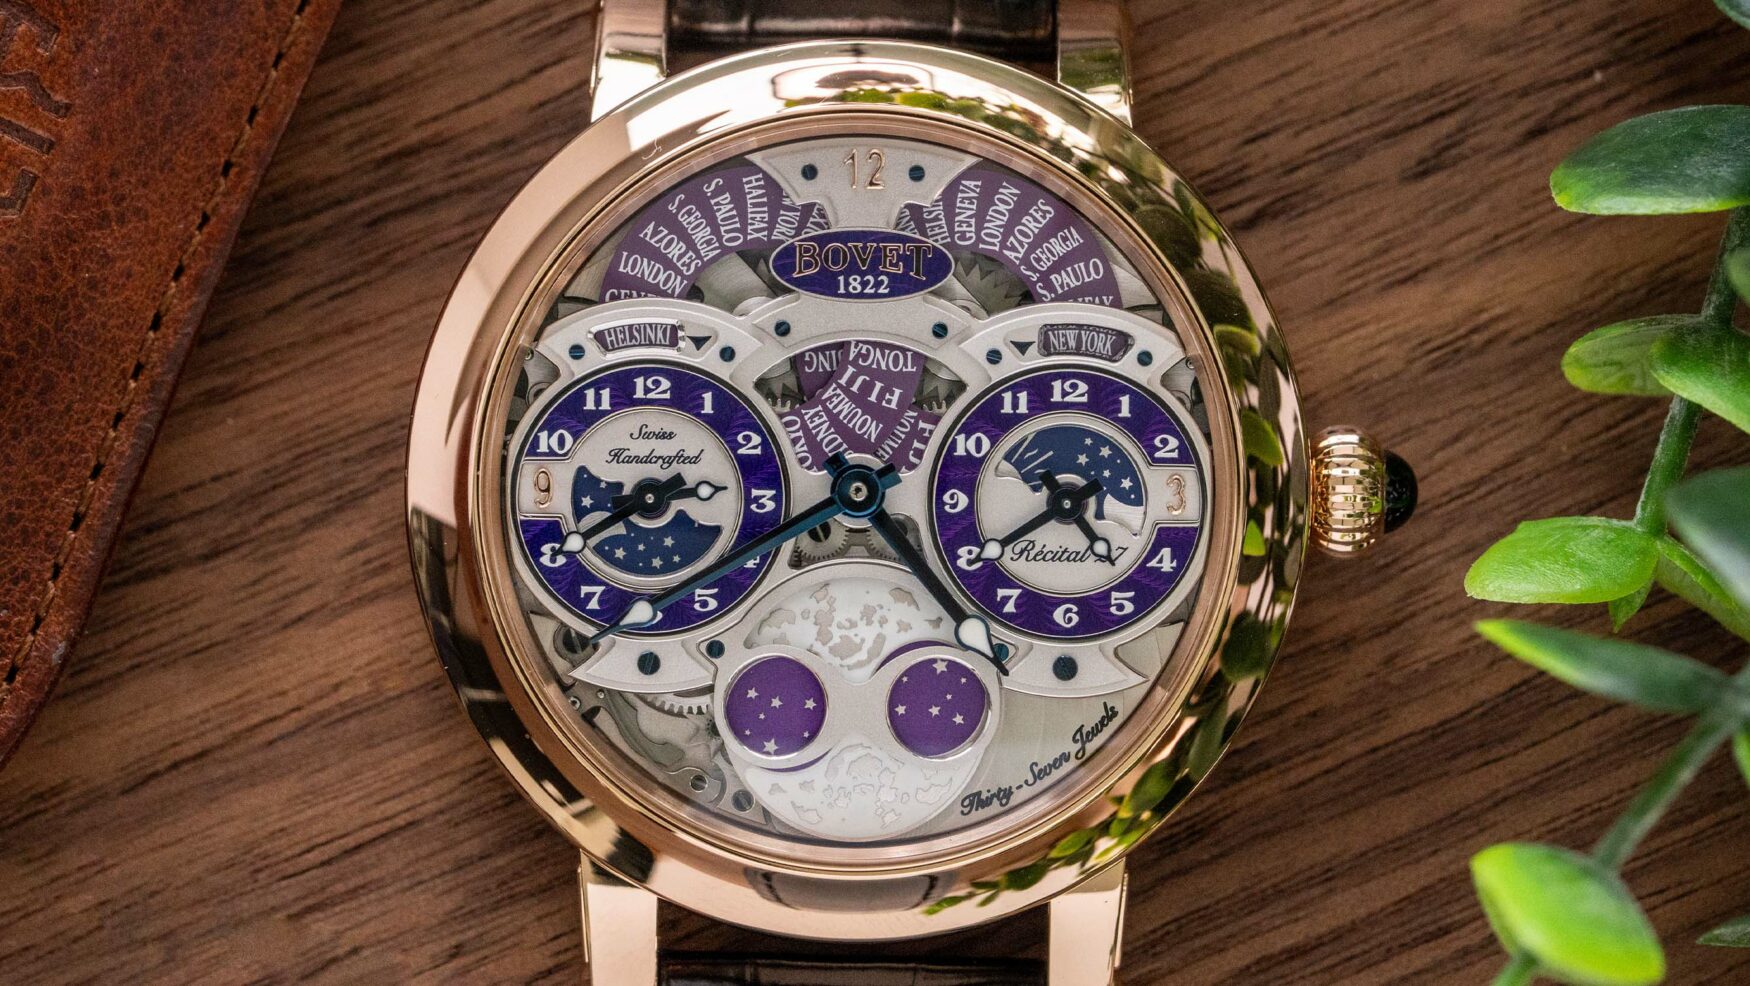 Is the Bovet Dimier Récital 27 a world timer, GMT, or better than both?